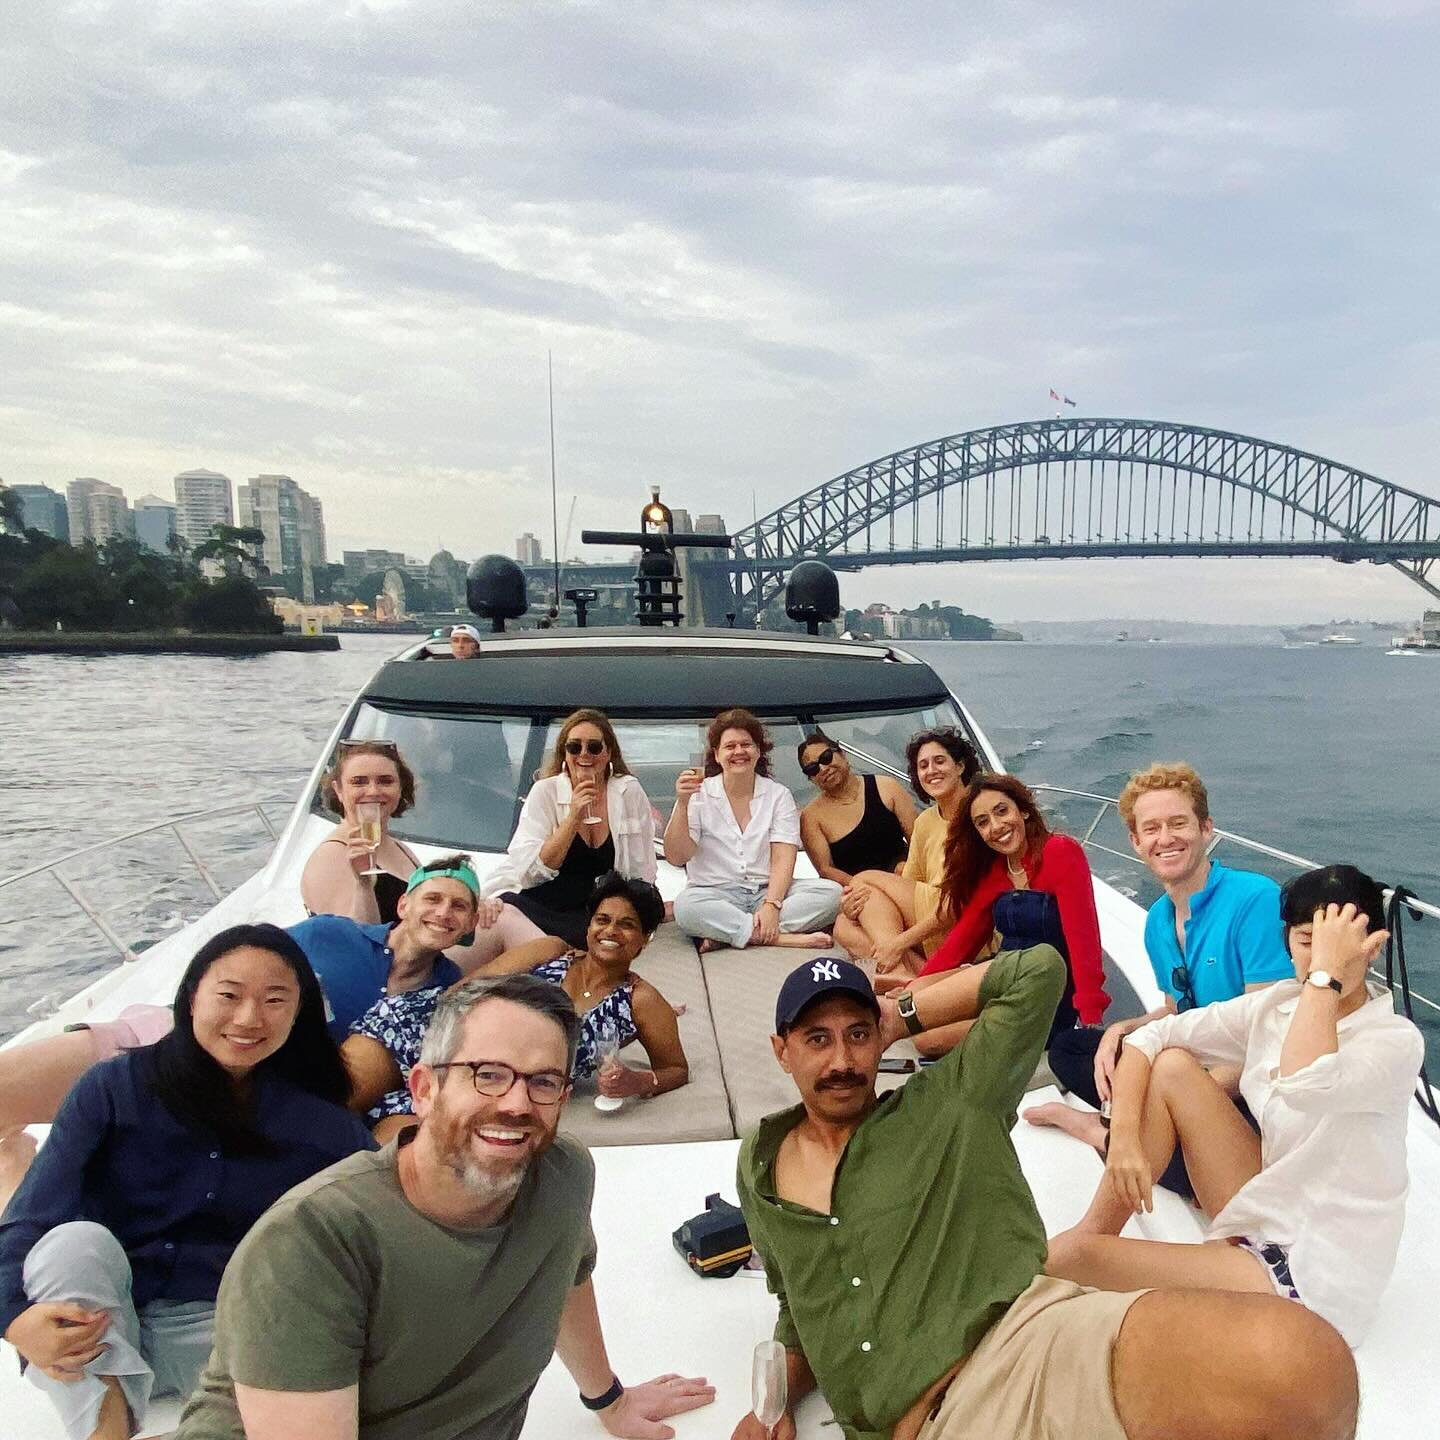 If we have to farewell amazing friends like @lanceloveseverybody &amp; @simona_inta then we have to do it dancing on a yacht and swimming around the harbour until 2am 🛥️🩵 thanks so much for an unforgettable night legends! Until next time across the